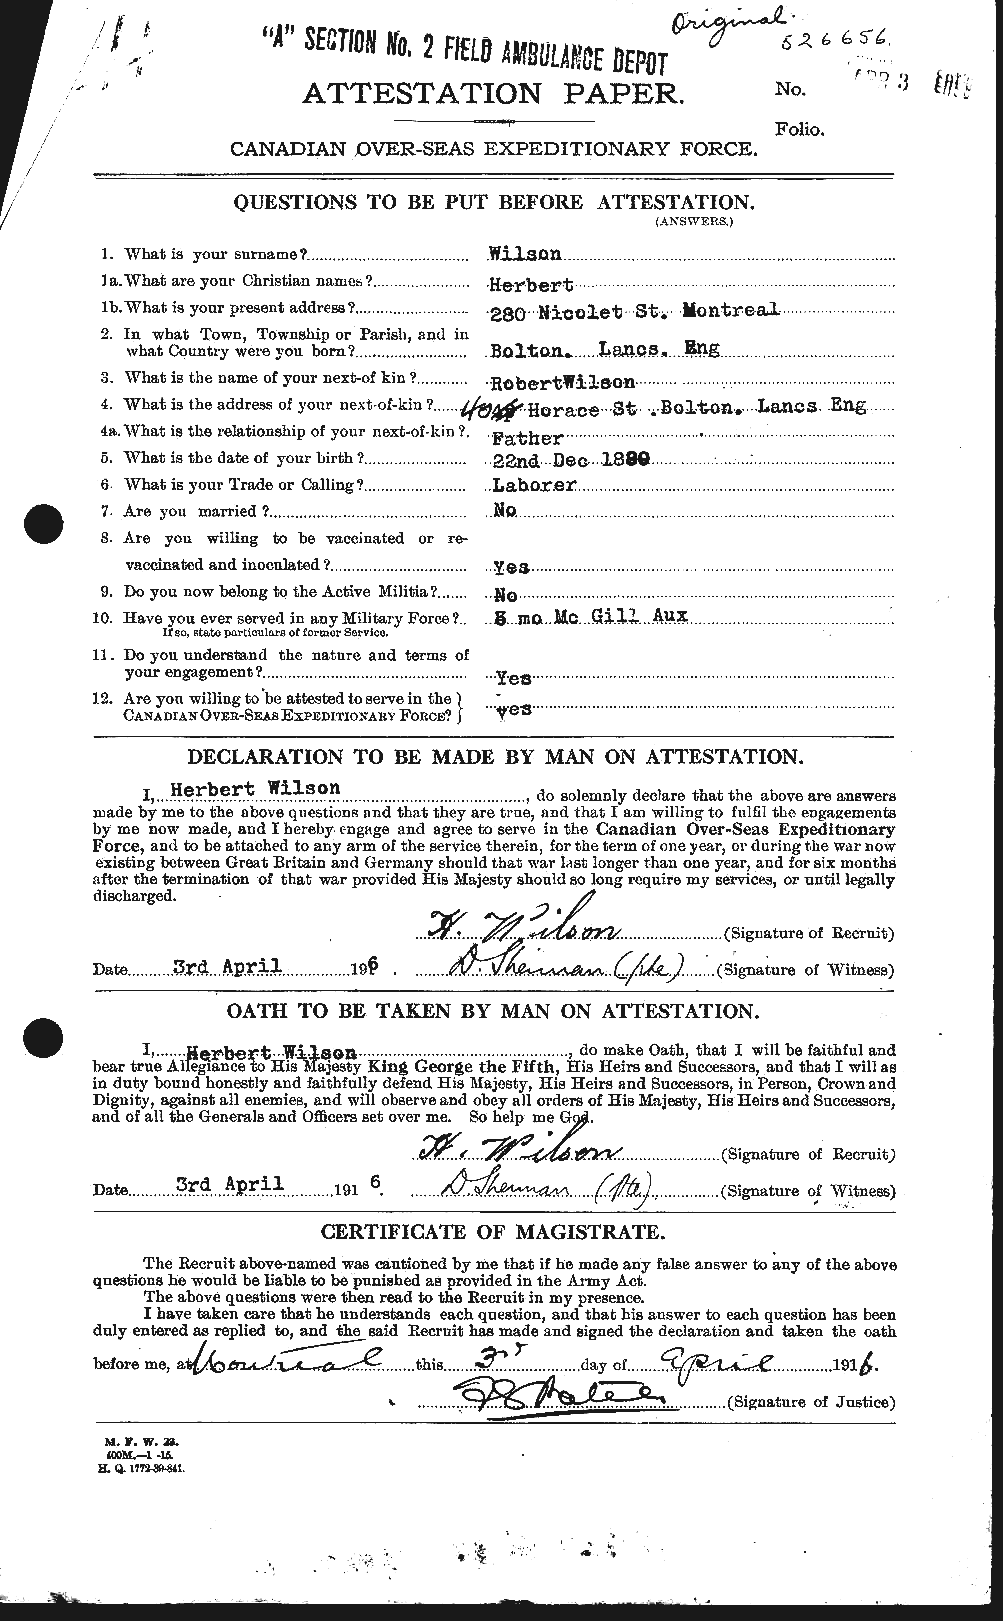 Personnel Records of the First World War - CEF 679546a